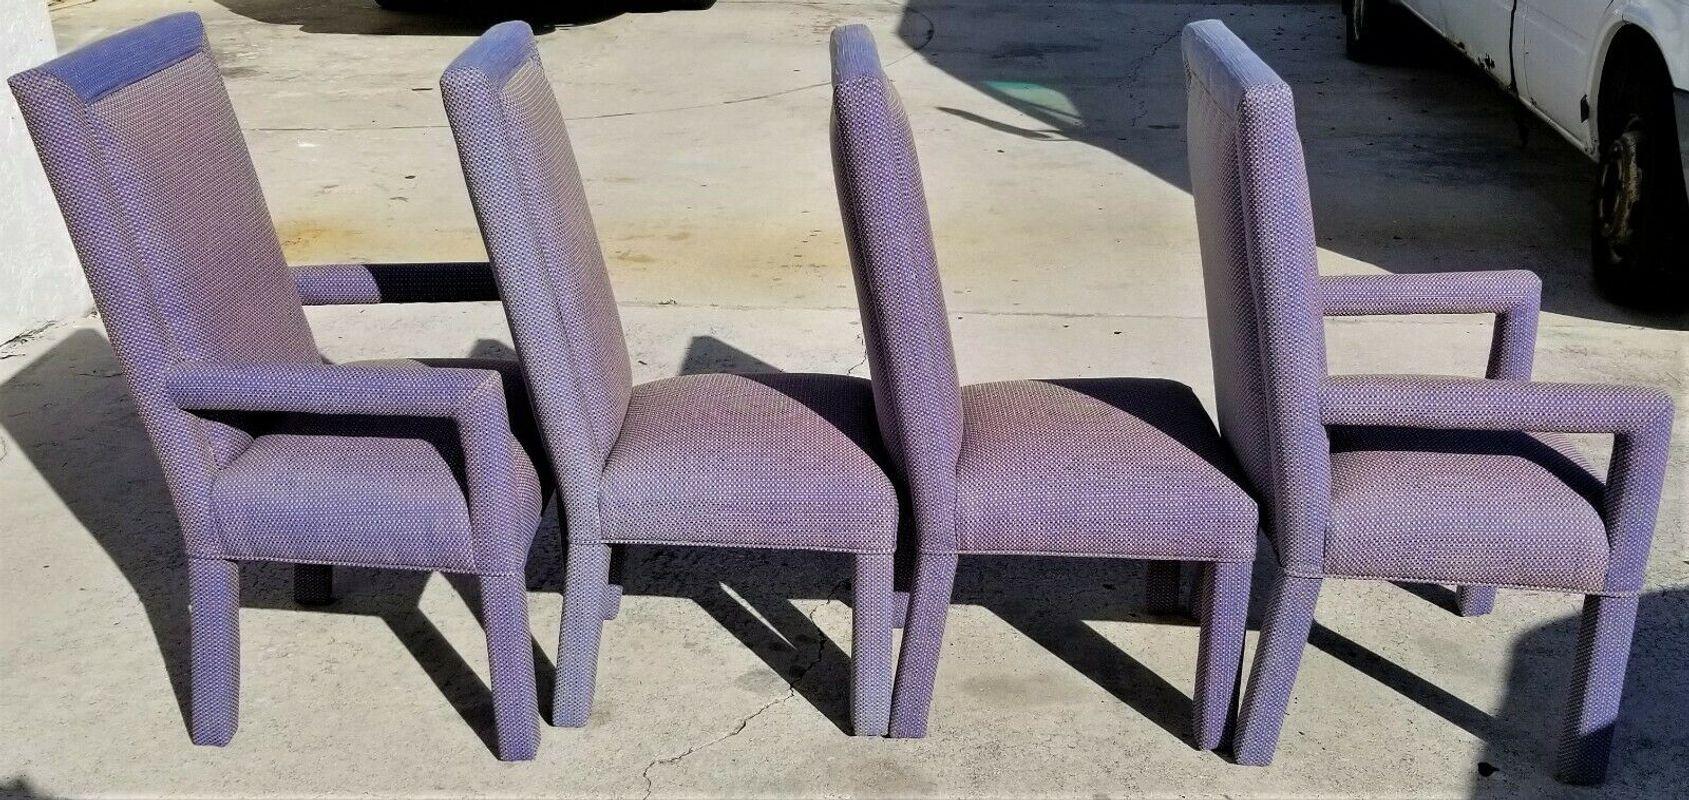 For FULL item description click on CONTINUE READING at the bottom of this page.

Offering One Of Our Recent Palm Beach Estate Fine Furniture Acquisitions Of A 
Set of 4 High-End Upholstered Blue Dining Chairs with Spring Supported Seats 
Fabric